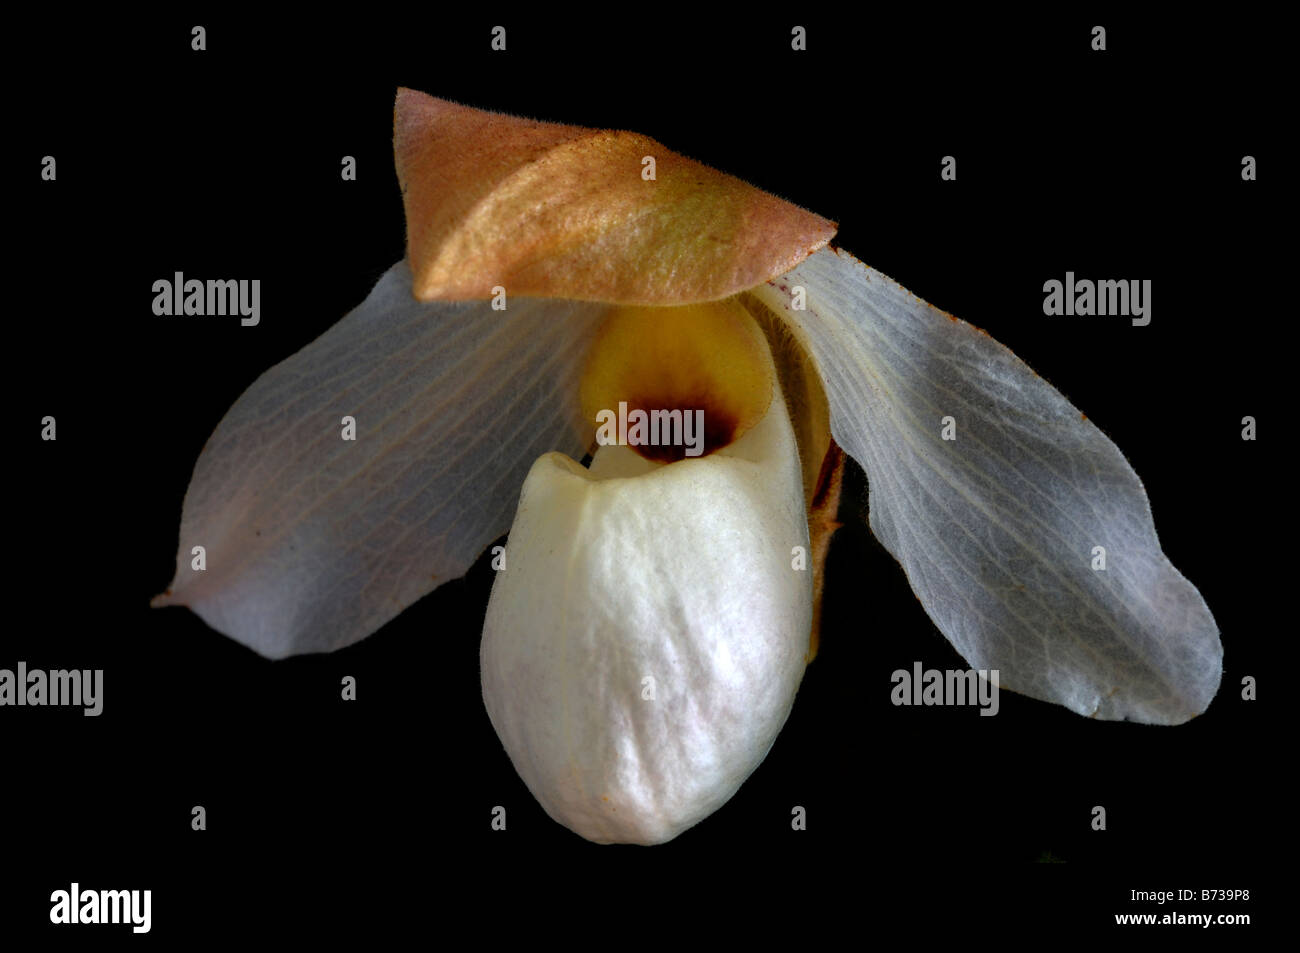 paphiopedilum delenatii white slipper orchid single flower bloom blooming flowering against a black background backdrop Stock Photo